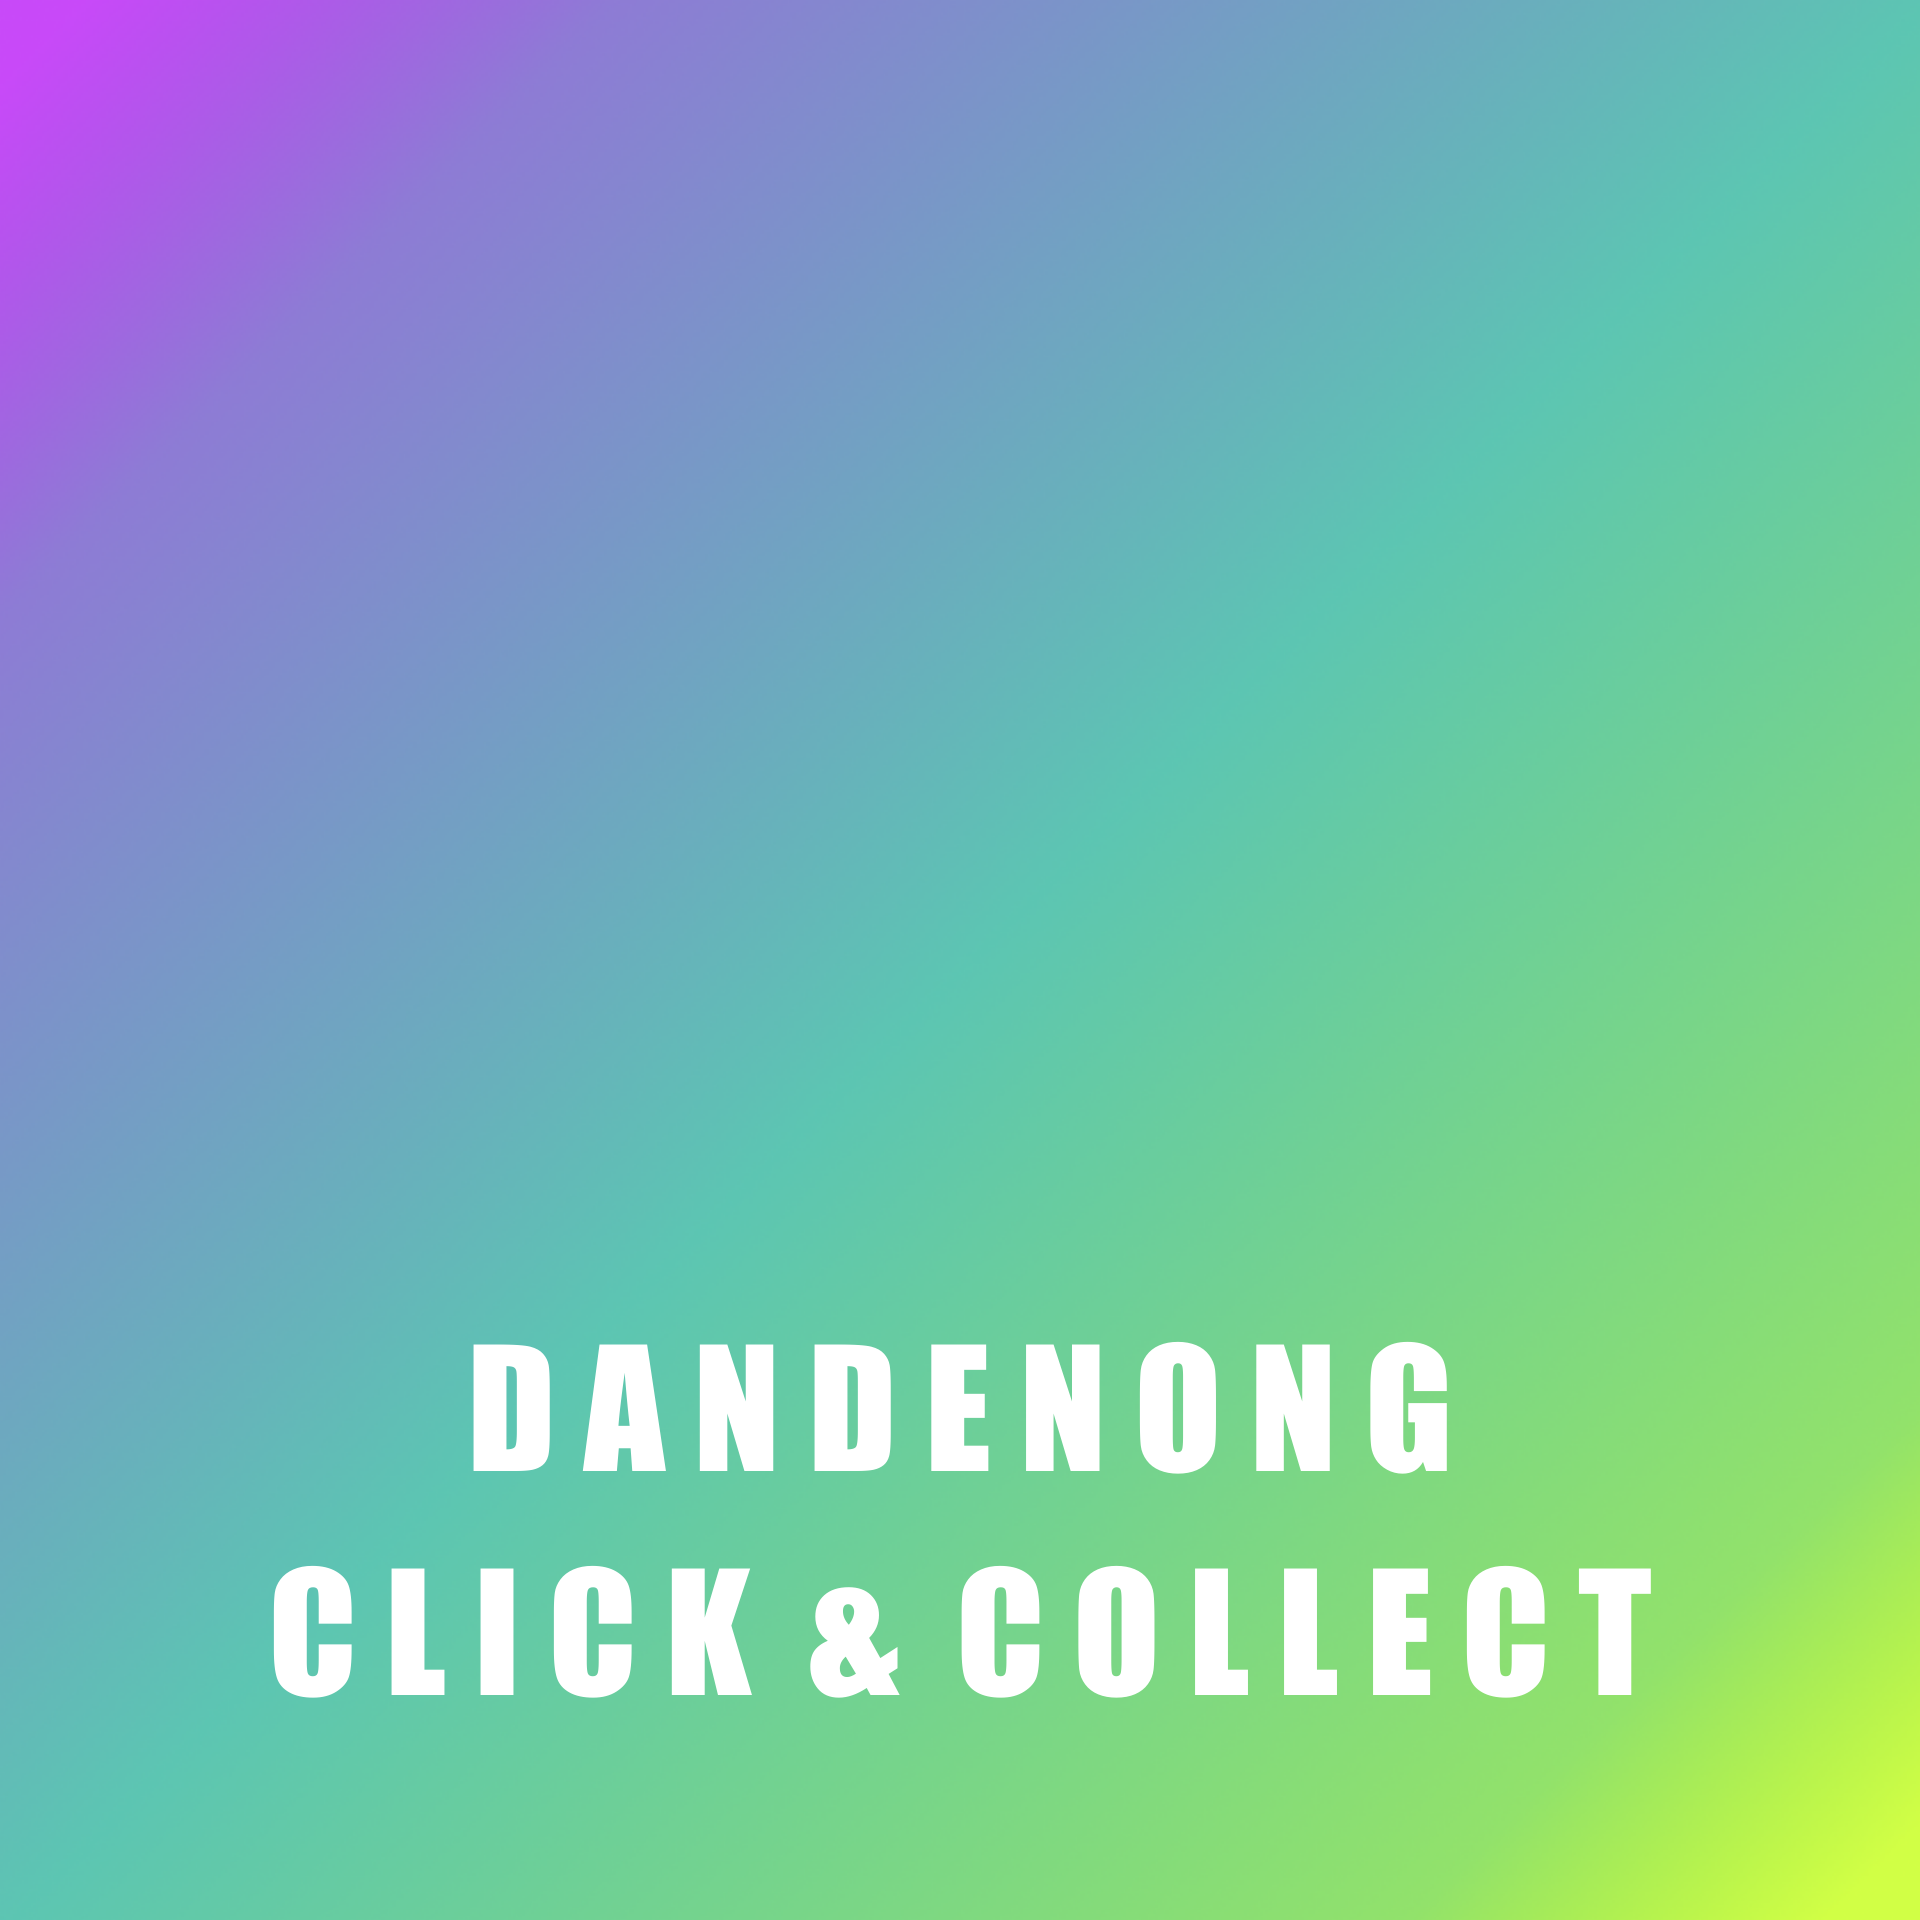 Super Fast Click & Collect Is Available At Our Dandenong Vape Shop!